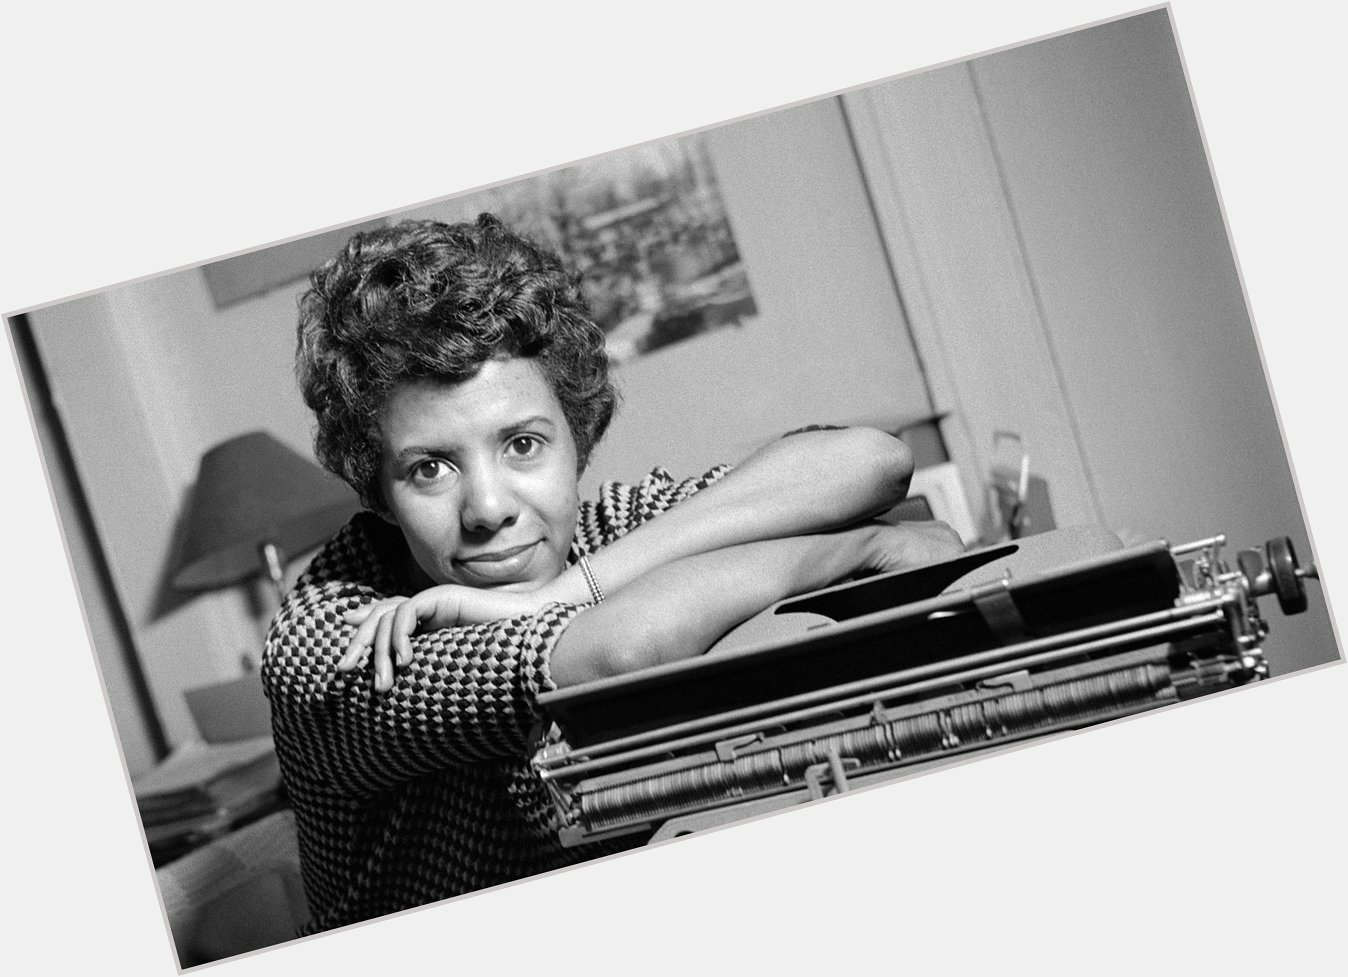 Six playwrights will honor works from Malcolm X and Lorraine Hansberry in new play.  